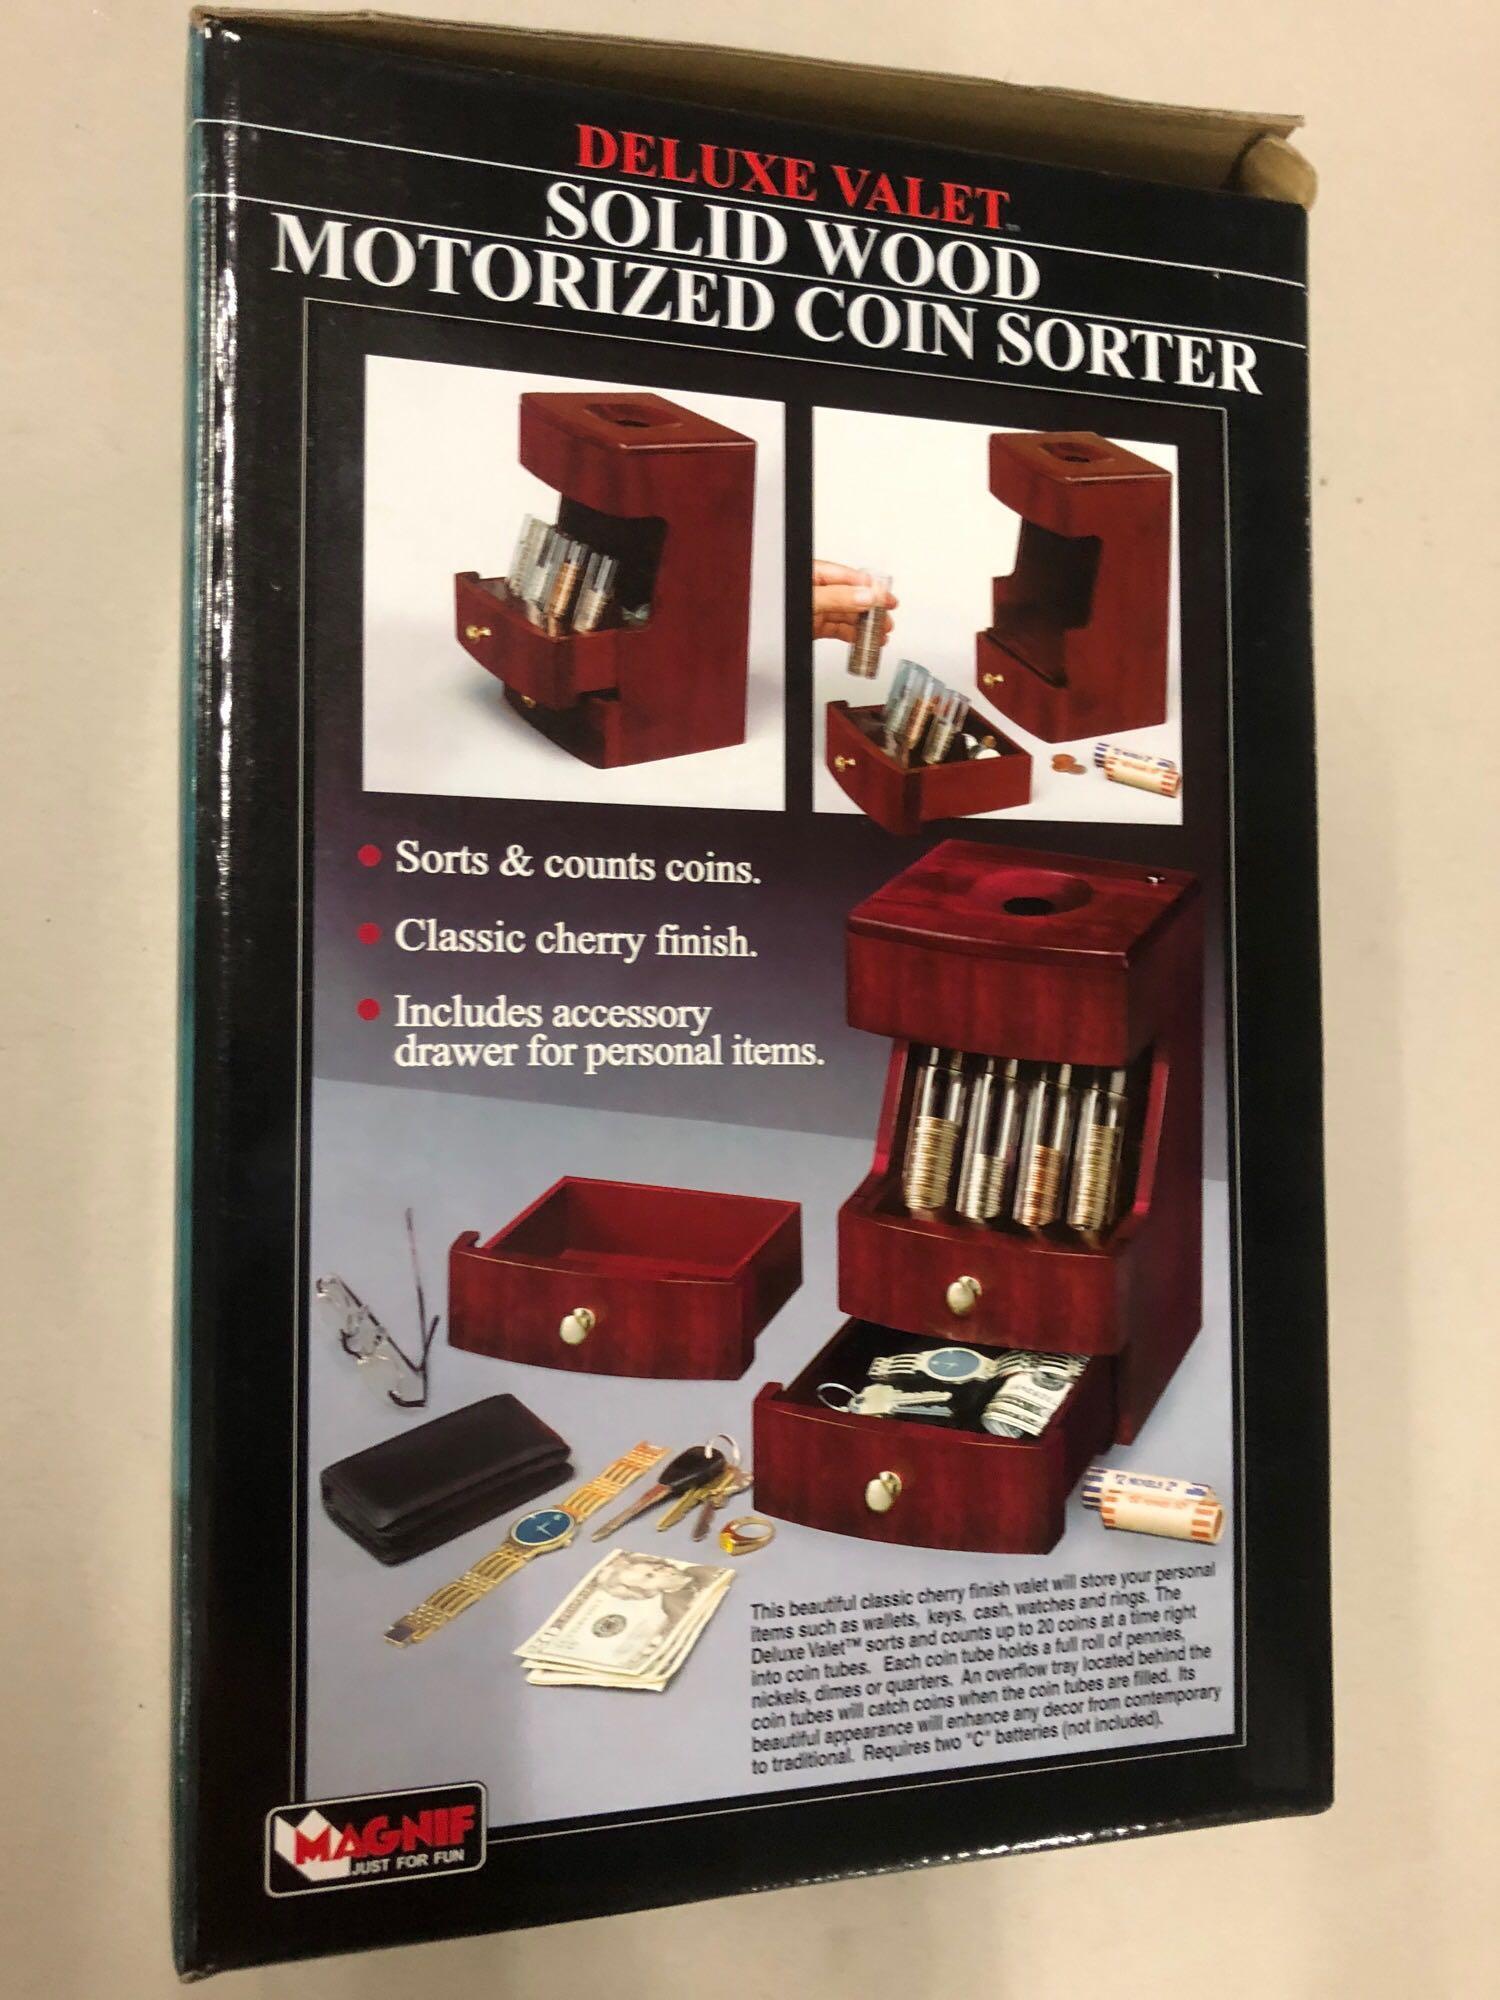 Solid Wood Deluxe Valet Motorized Coin Sorter (Sorts & Counts, Classic Cherry Finish, Accessory